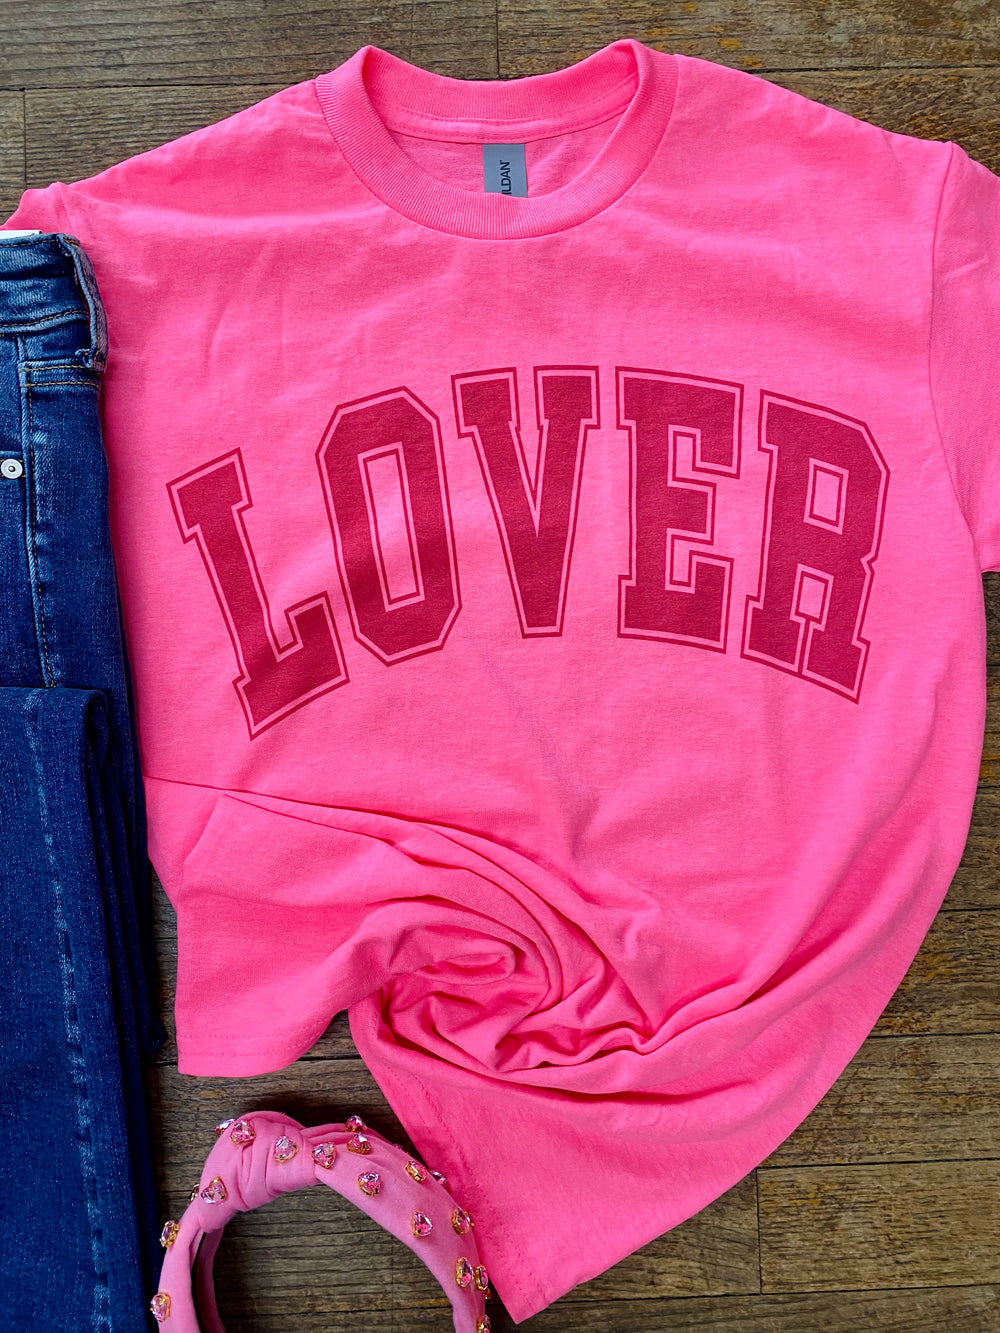 Lover Graphic Tee-Tops-Anatomy Clothing Boutique in Brenham, Texas